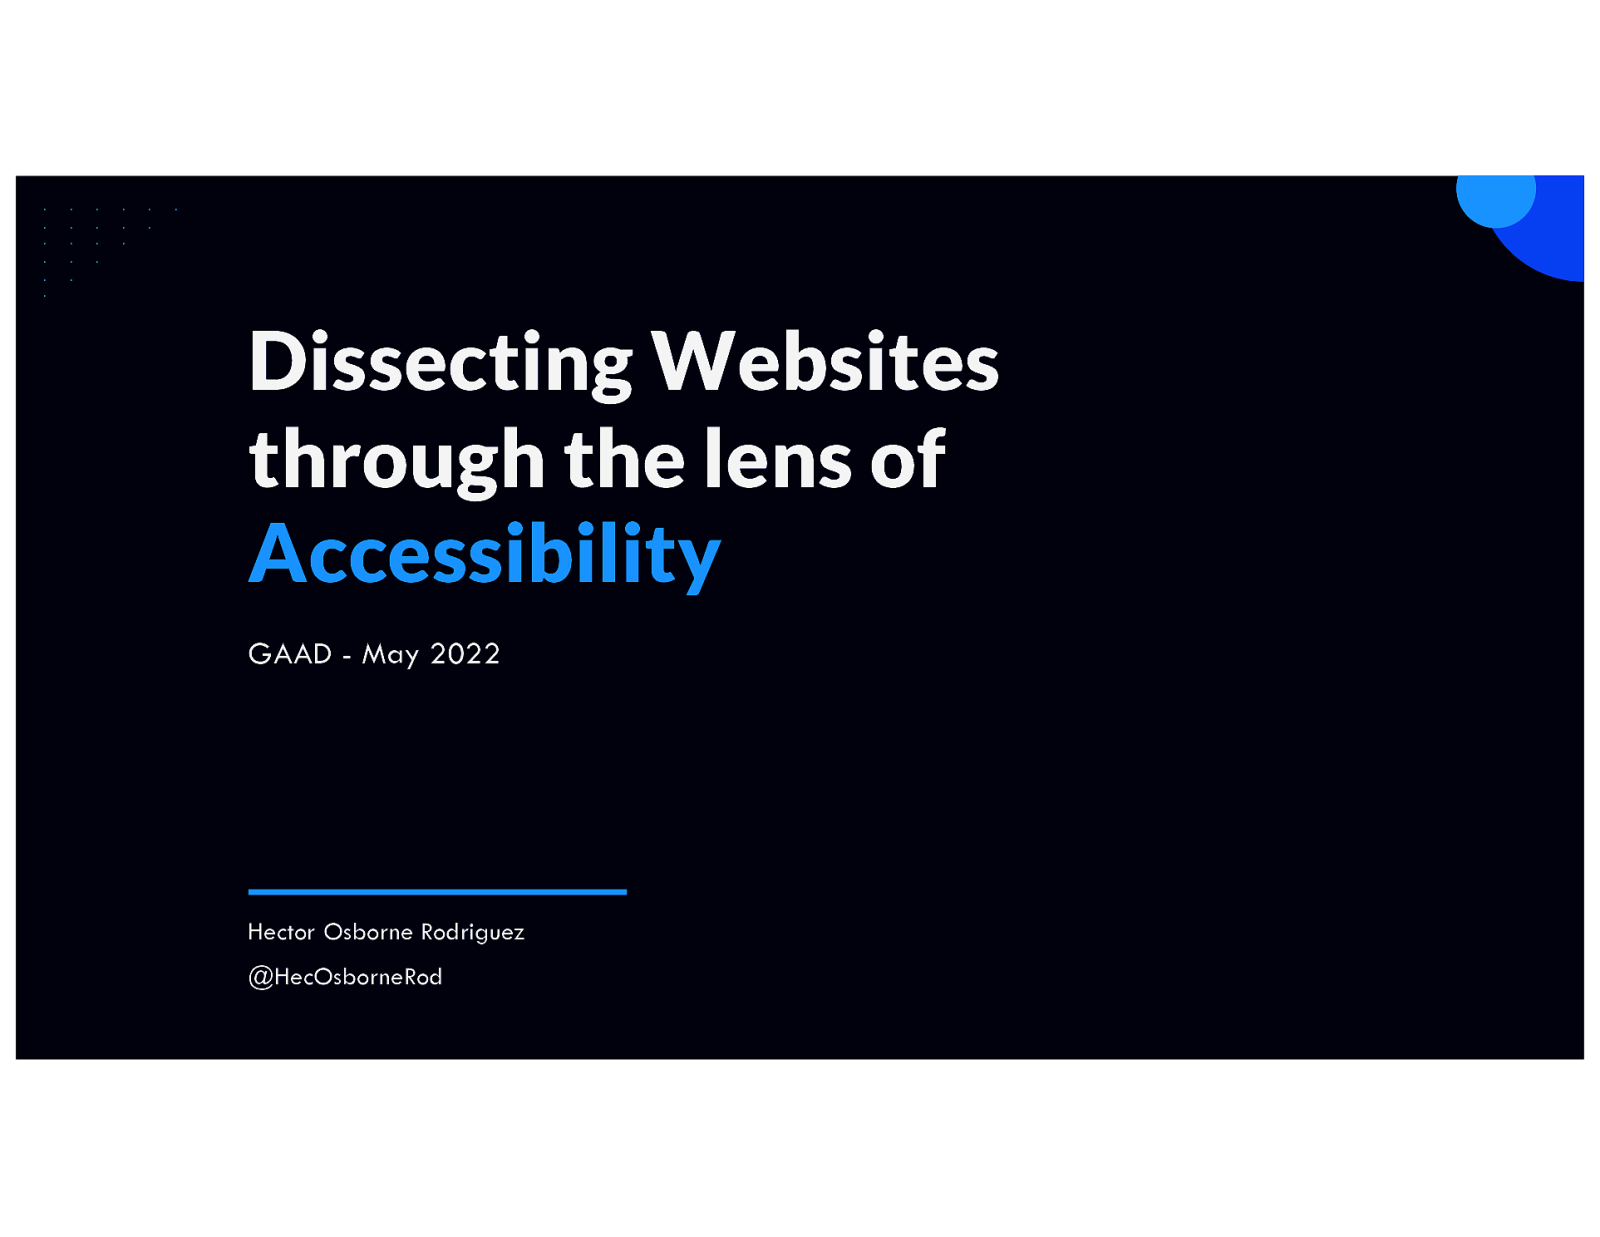 Dissecting websites through the lens of accessibility